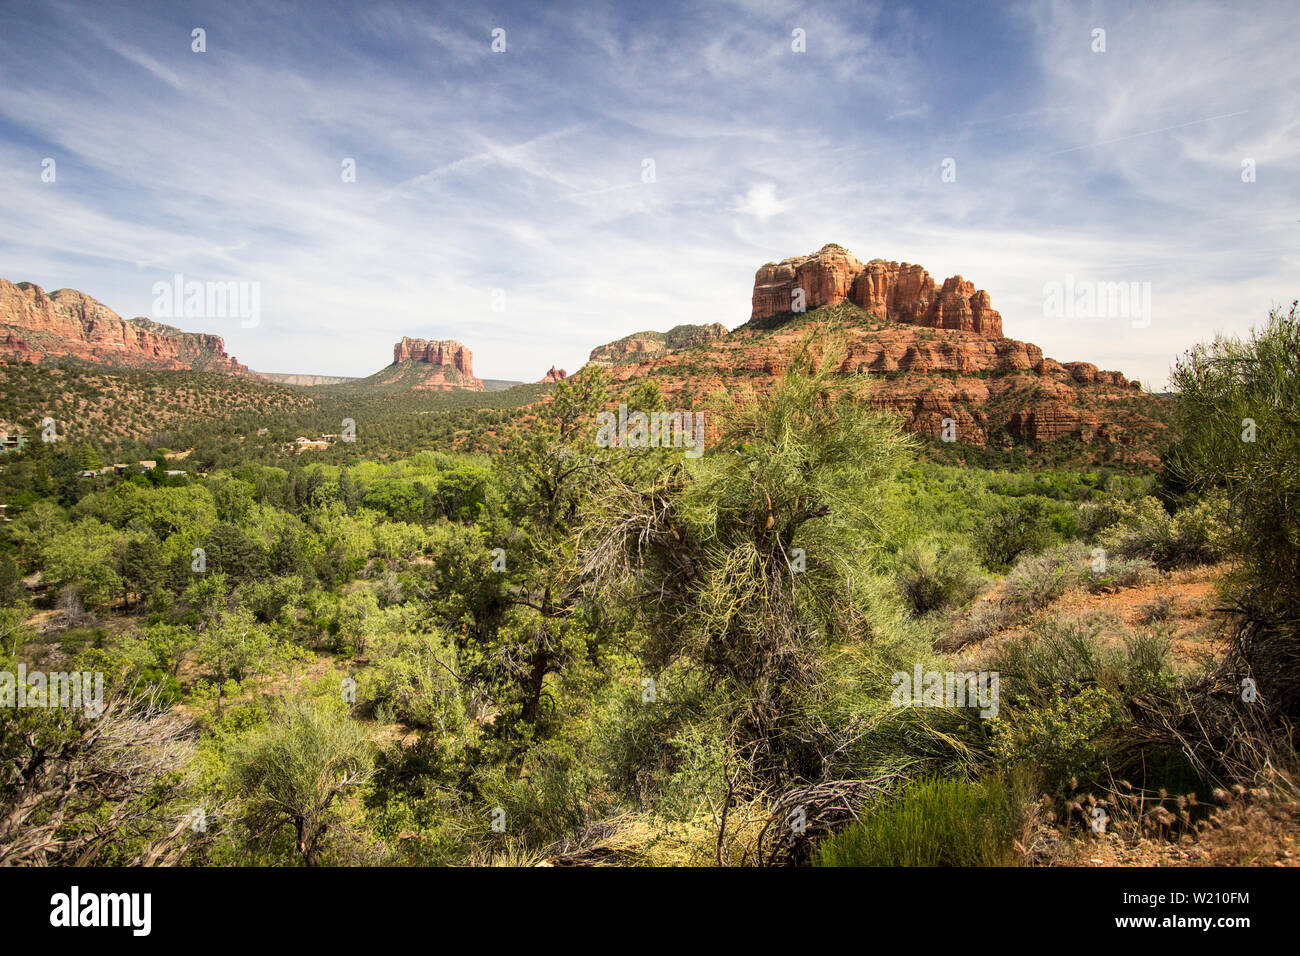 Red Rocks Of Sedona. Scenic Sedona, Arizona red rock landscape with the famous Courthouse and Bell mountain geological formations under a  blue sky. Stock Photo